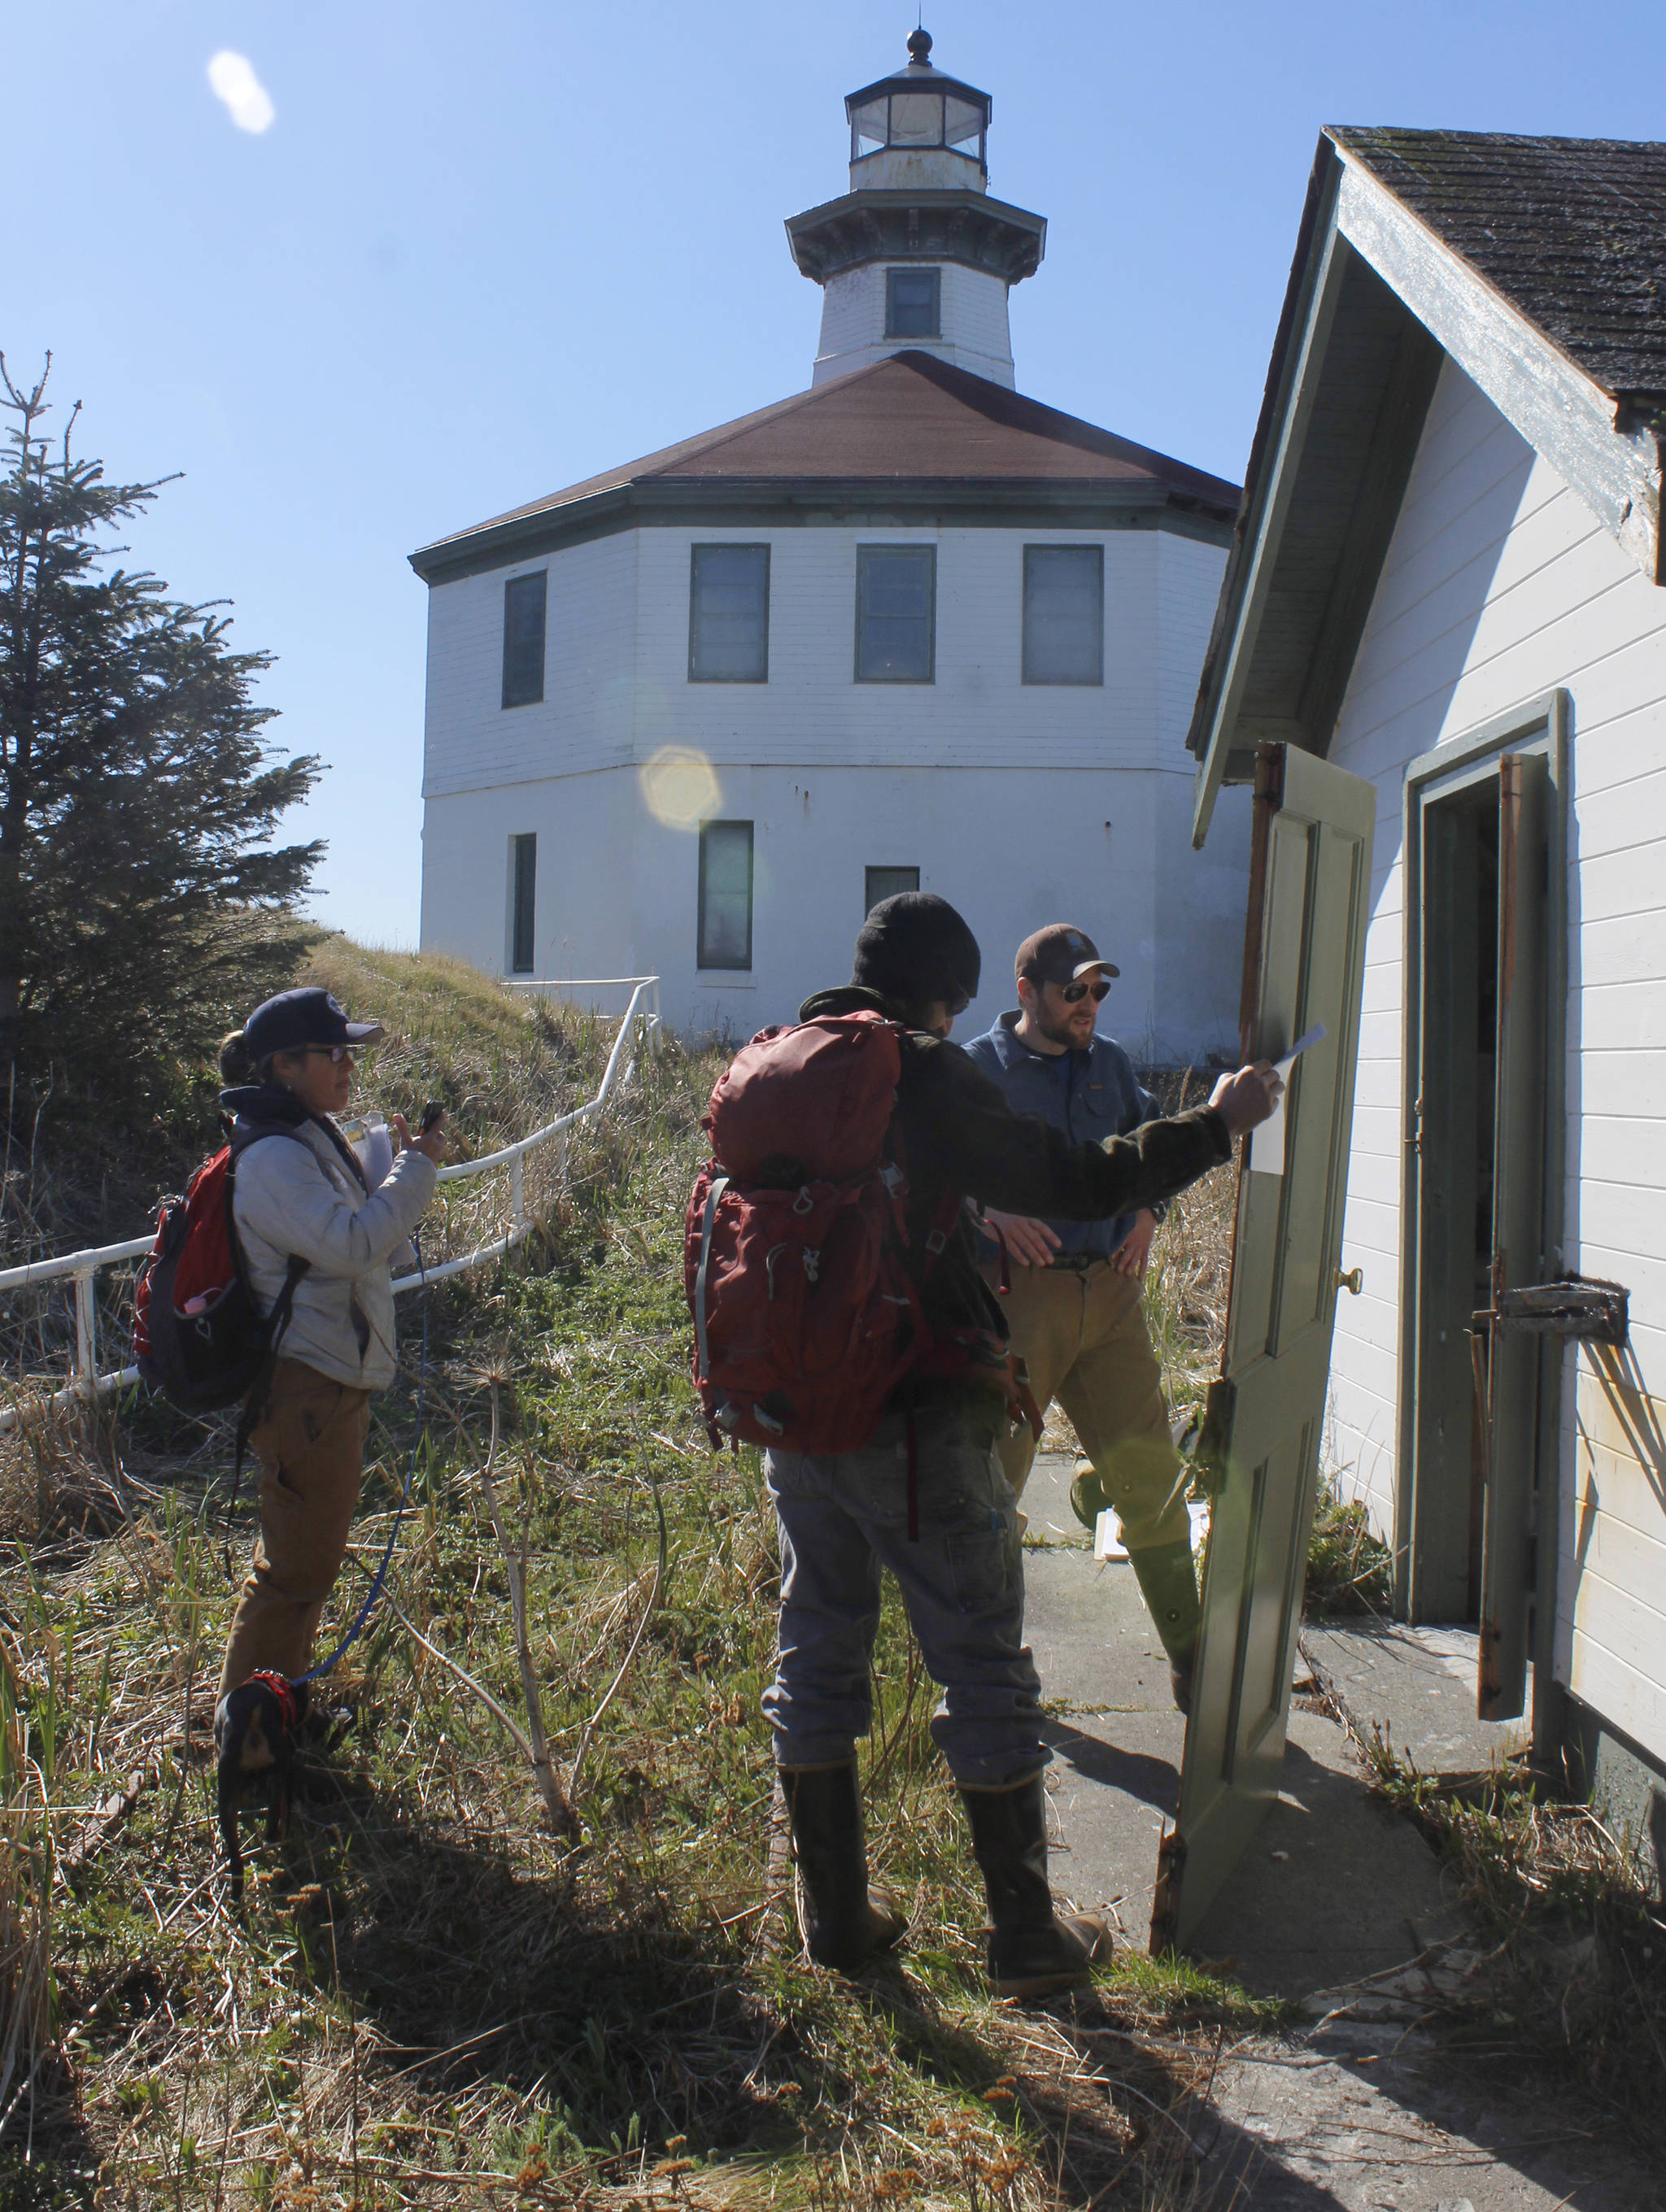 Eldred Rock Lighthouse Preservation Association Executive Director Sue York and board members Justin Fantasia and Jonathan Wood examine a broken door at Eldred Rock Lighthouse on Monday, April 29, 2019. (Alex McCarthy | Juneau Empire)